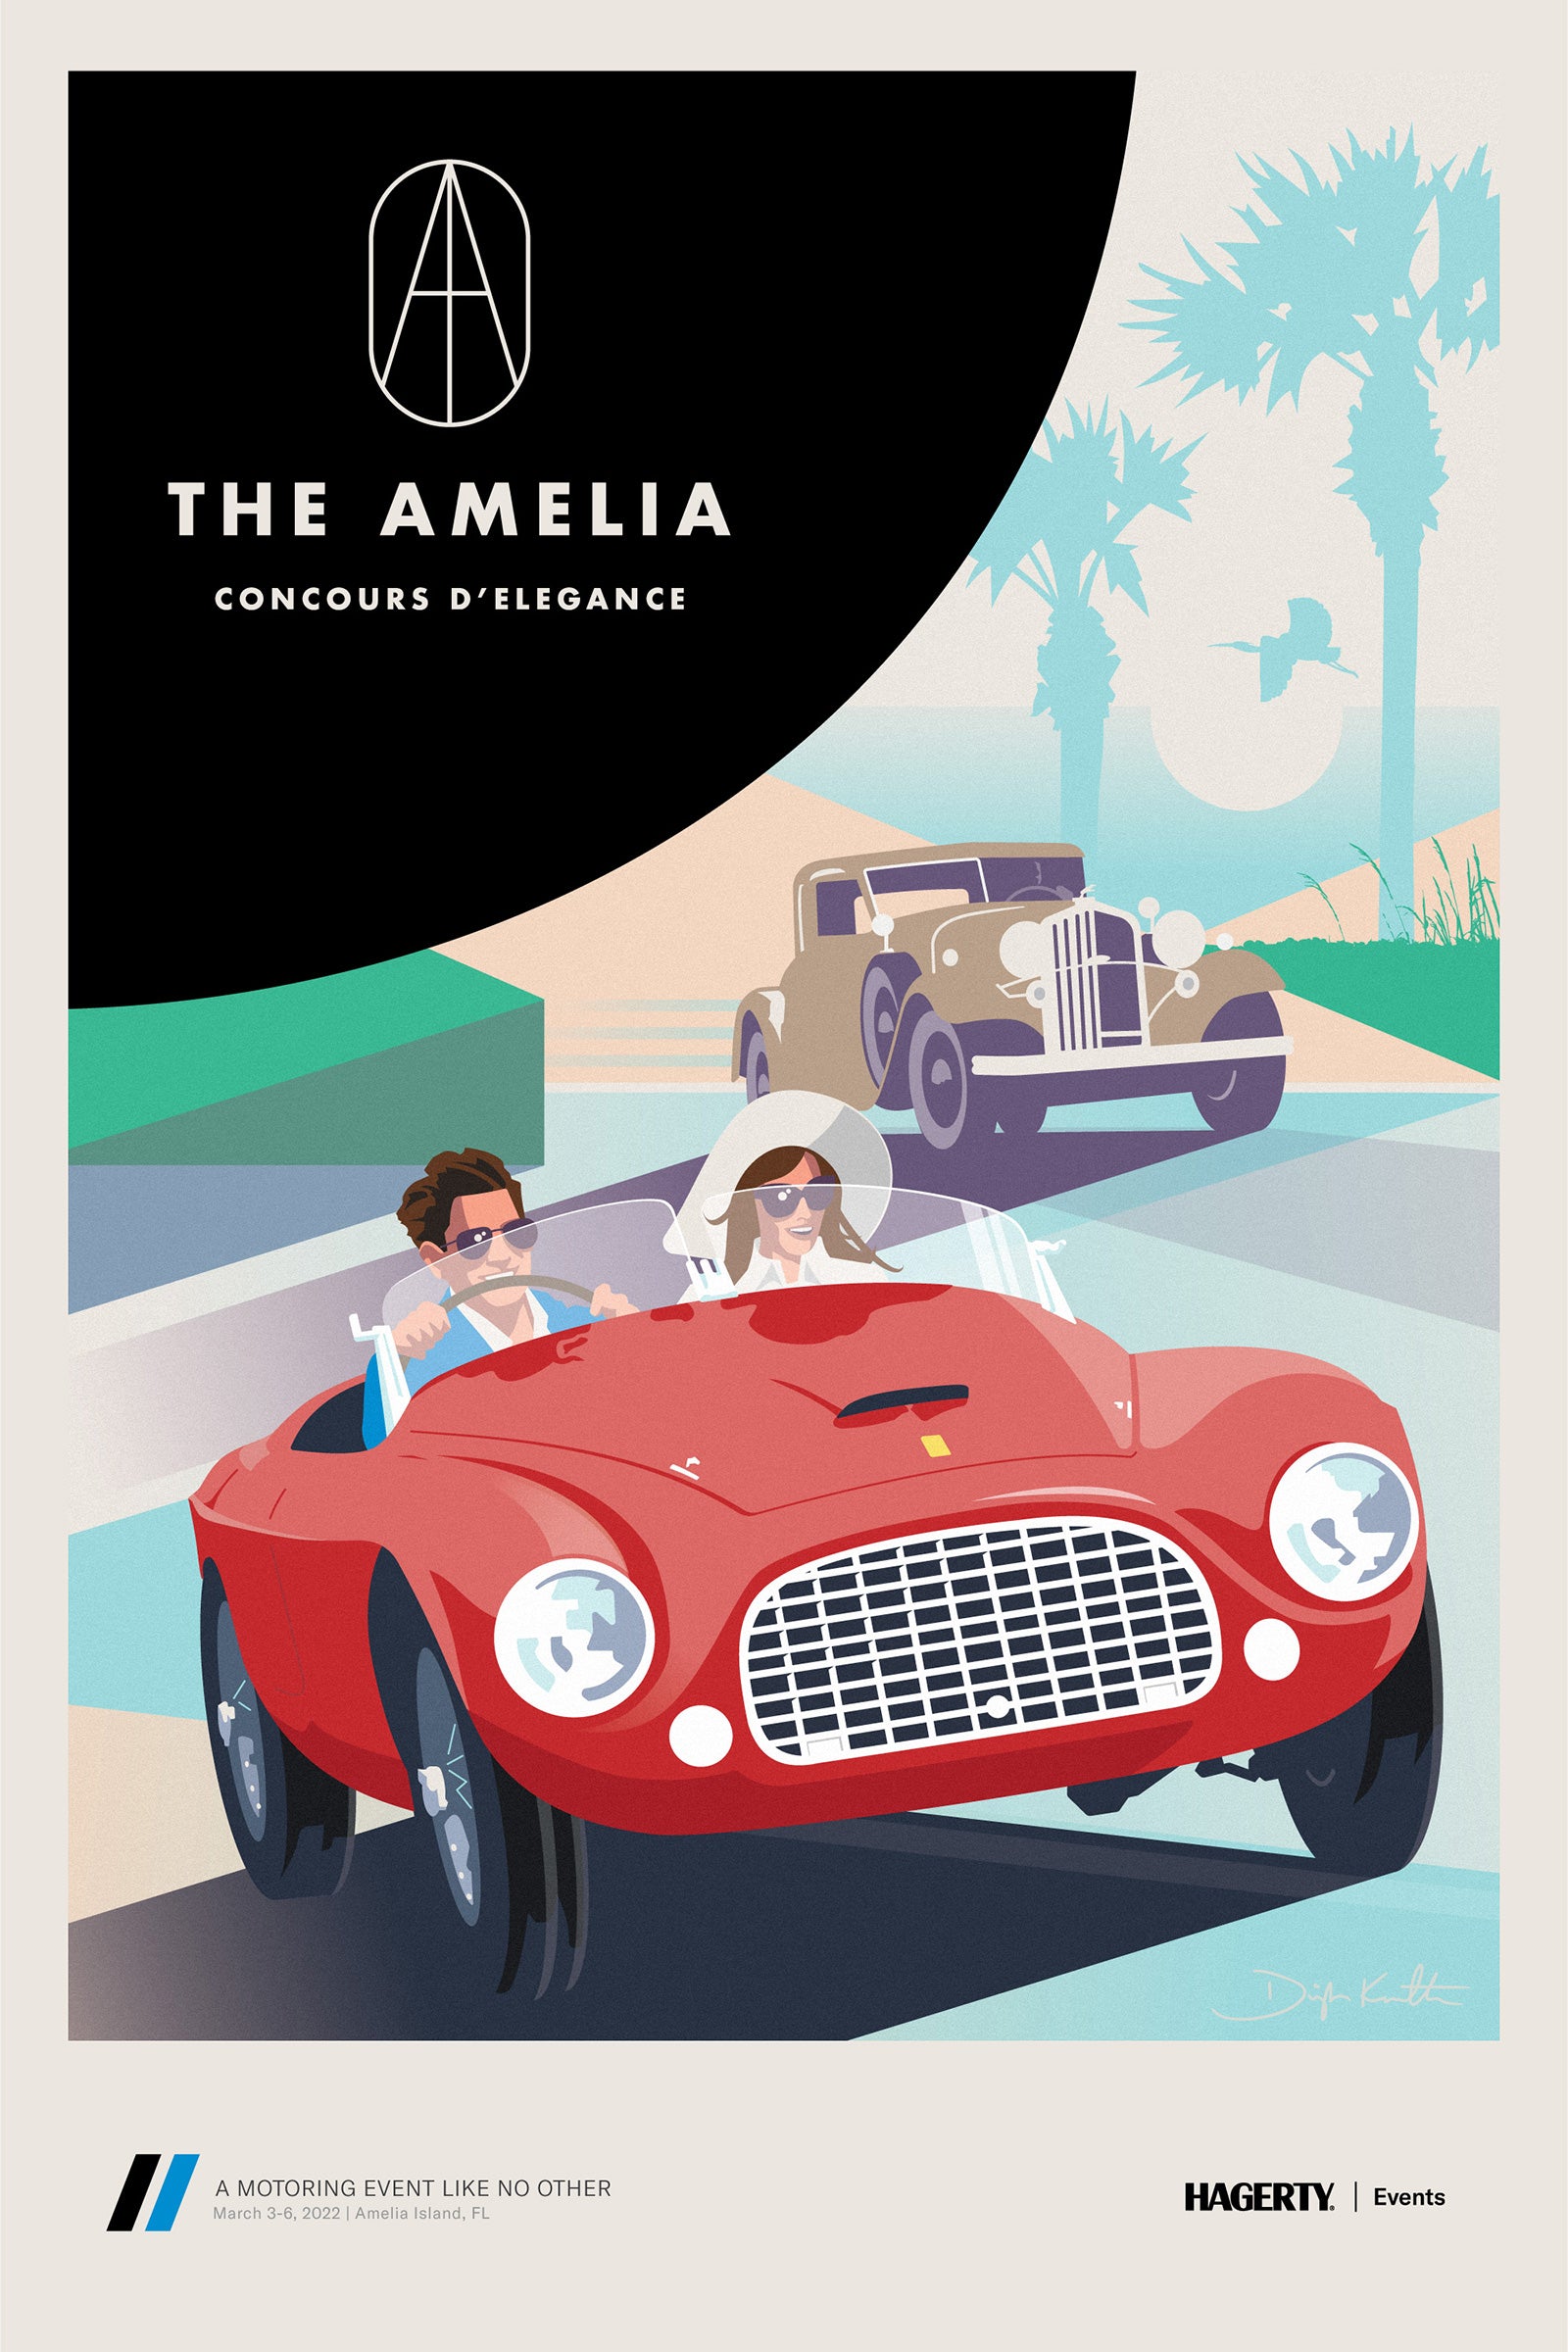 Dwight Knowlton The Amelia Concours d'Elegance Poster Hagerty